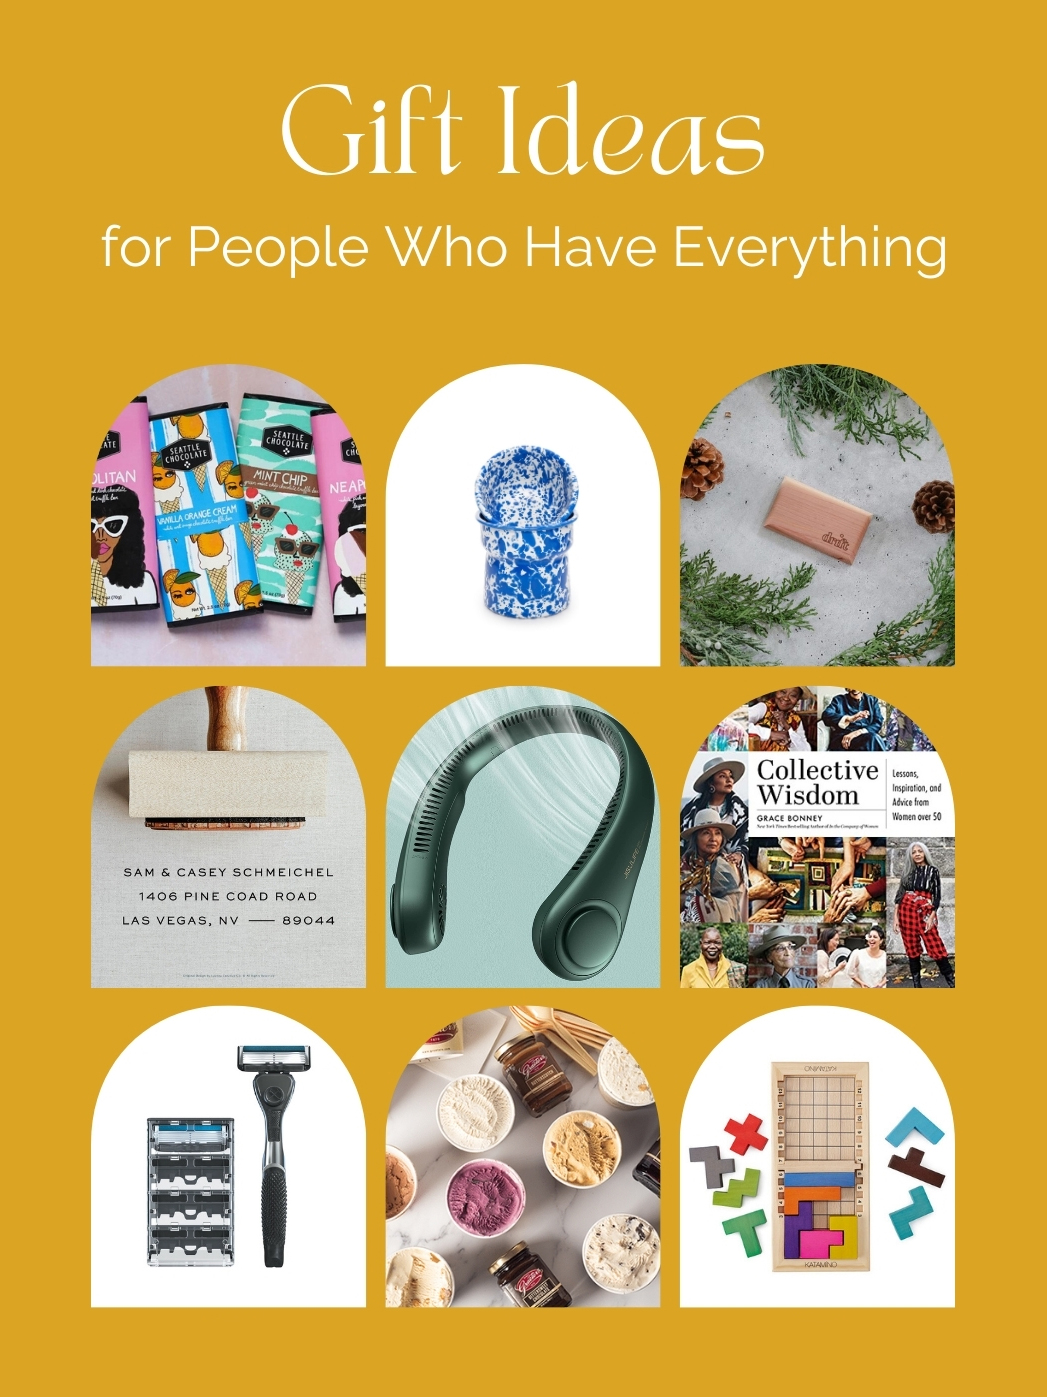 50+ Gift Ideas for Families who Have Everything